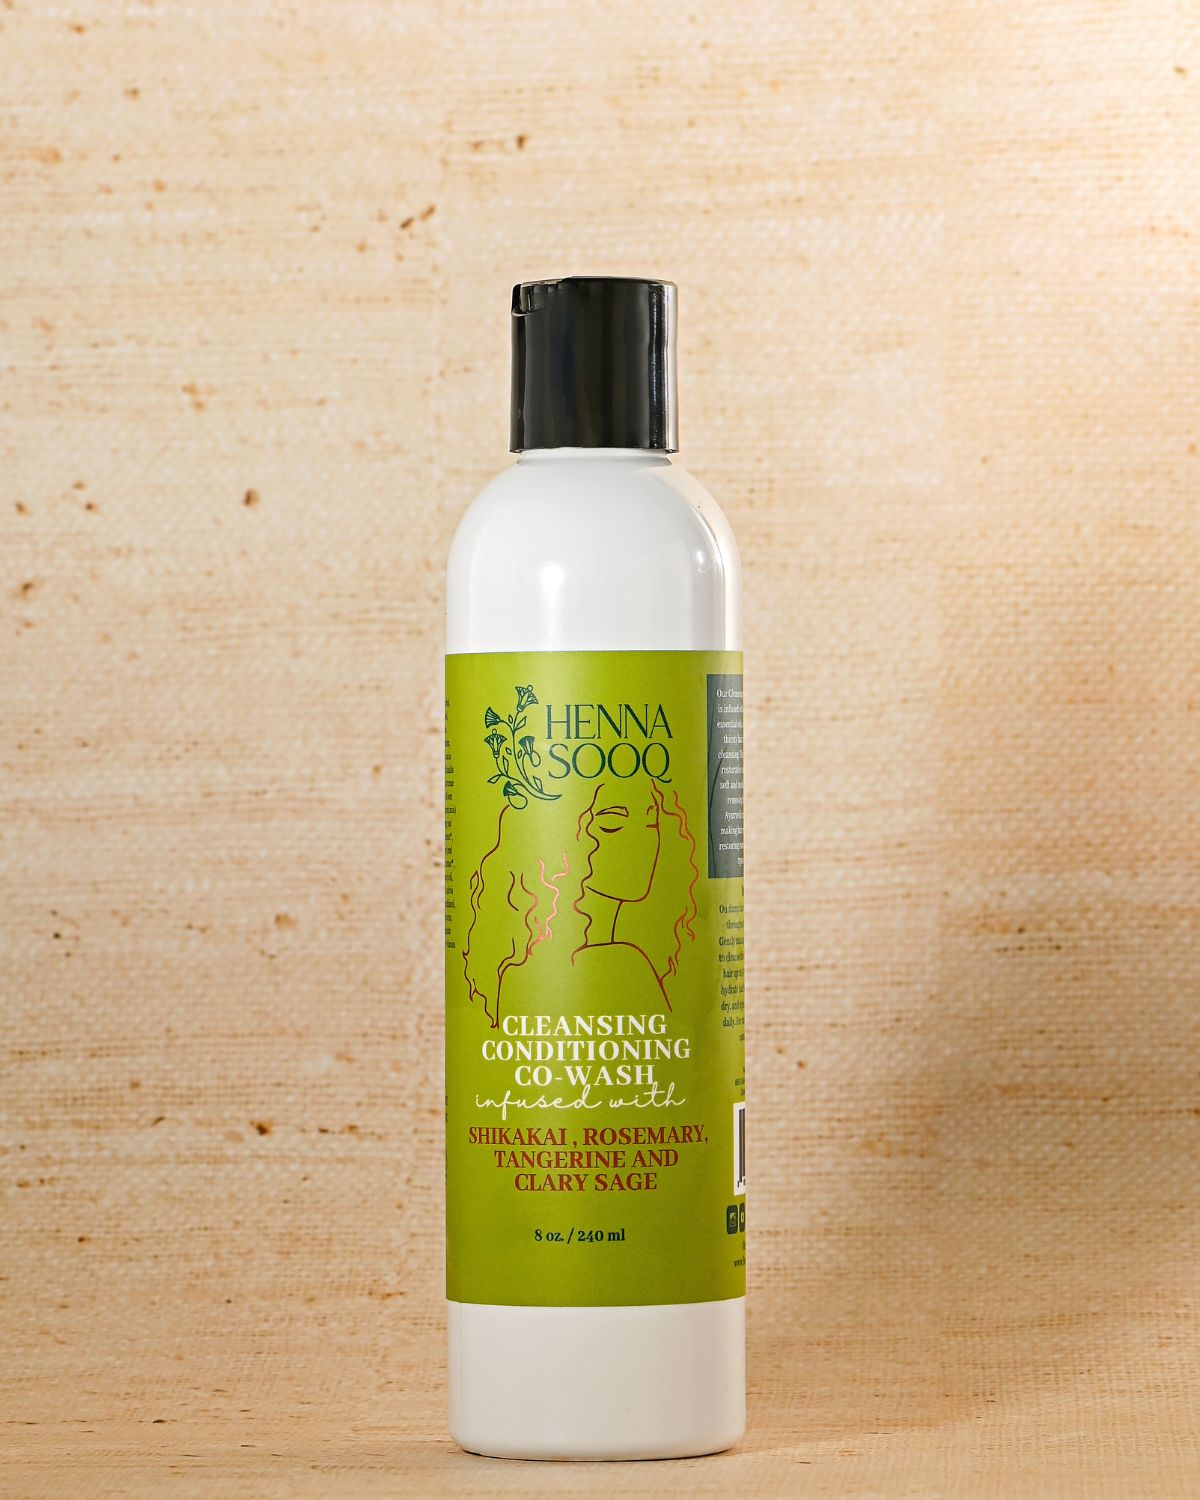 Cleansing Conditioning CoWash - Rosemary, Tangerine and Clary Sage - Henna Sooq